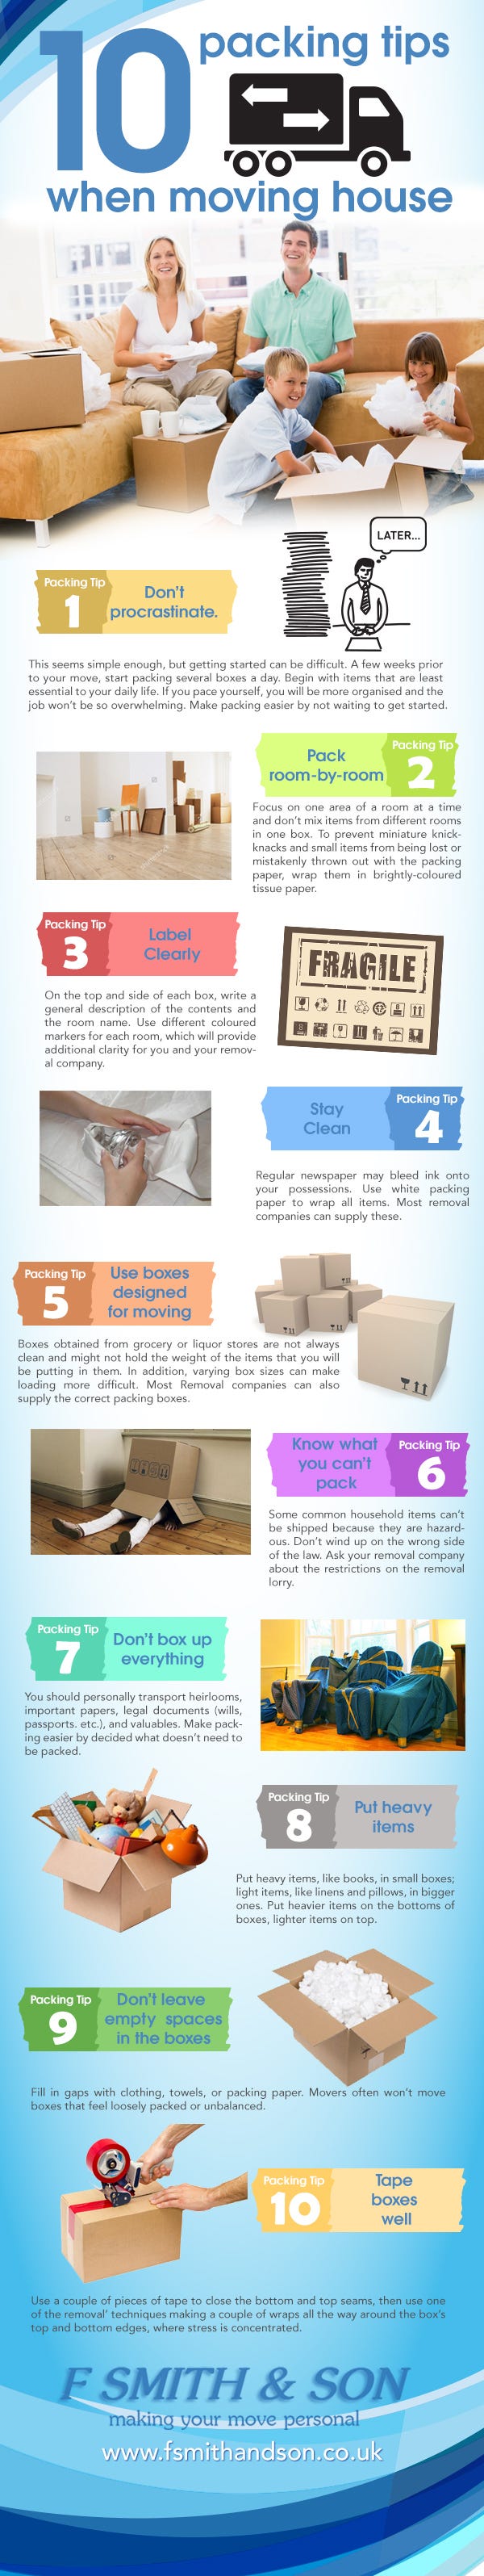 Packing Tips for Moving House ...